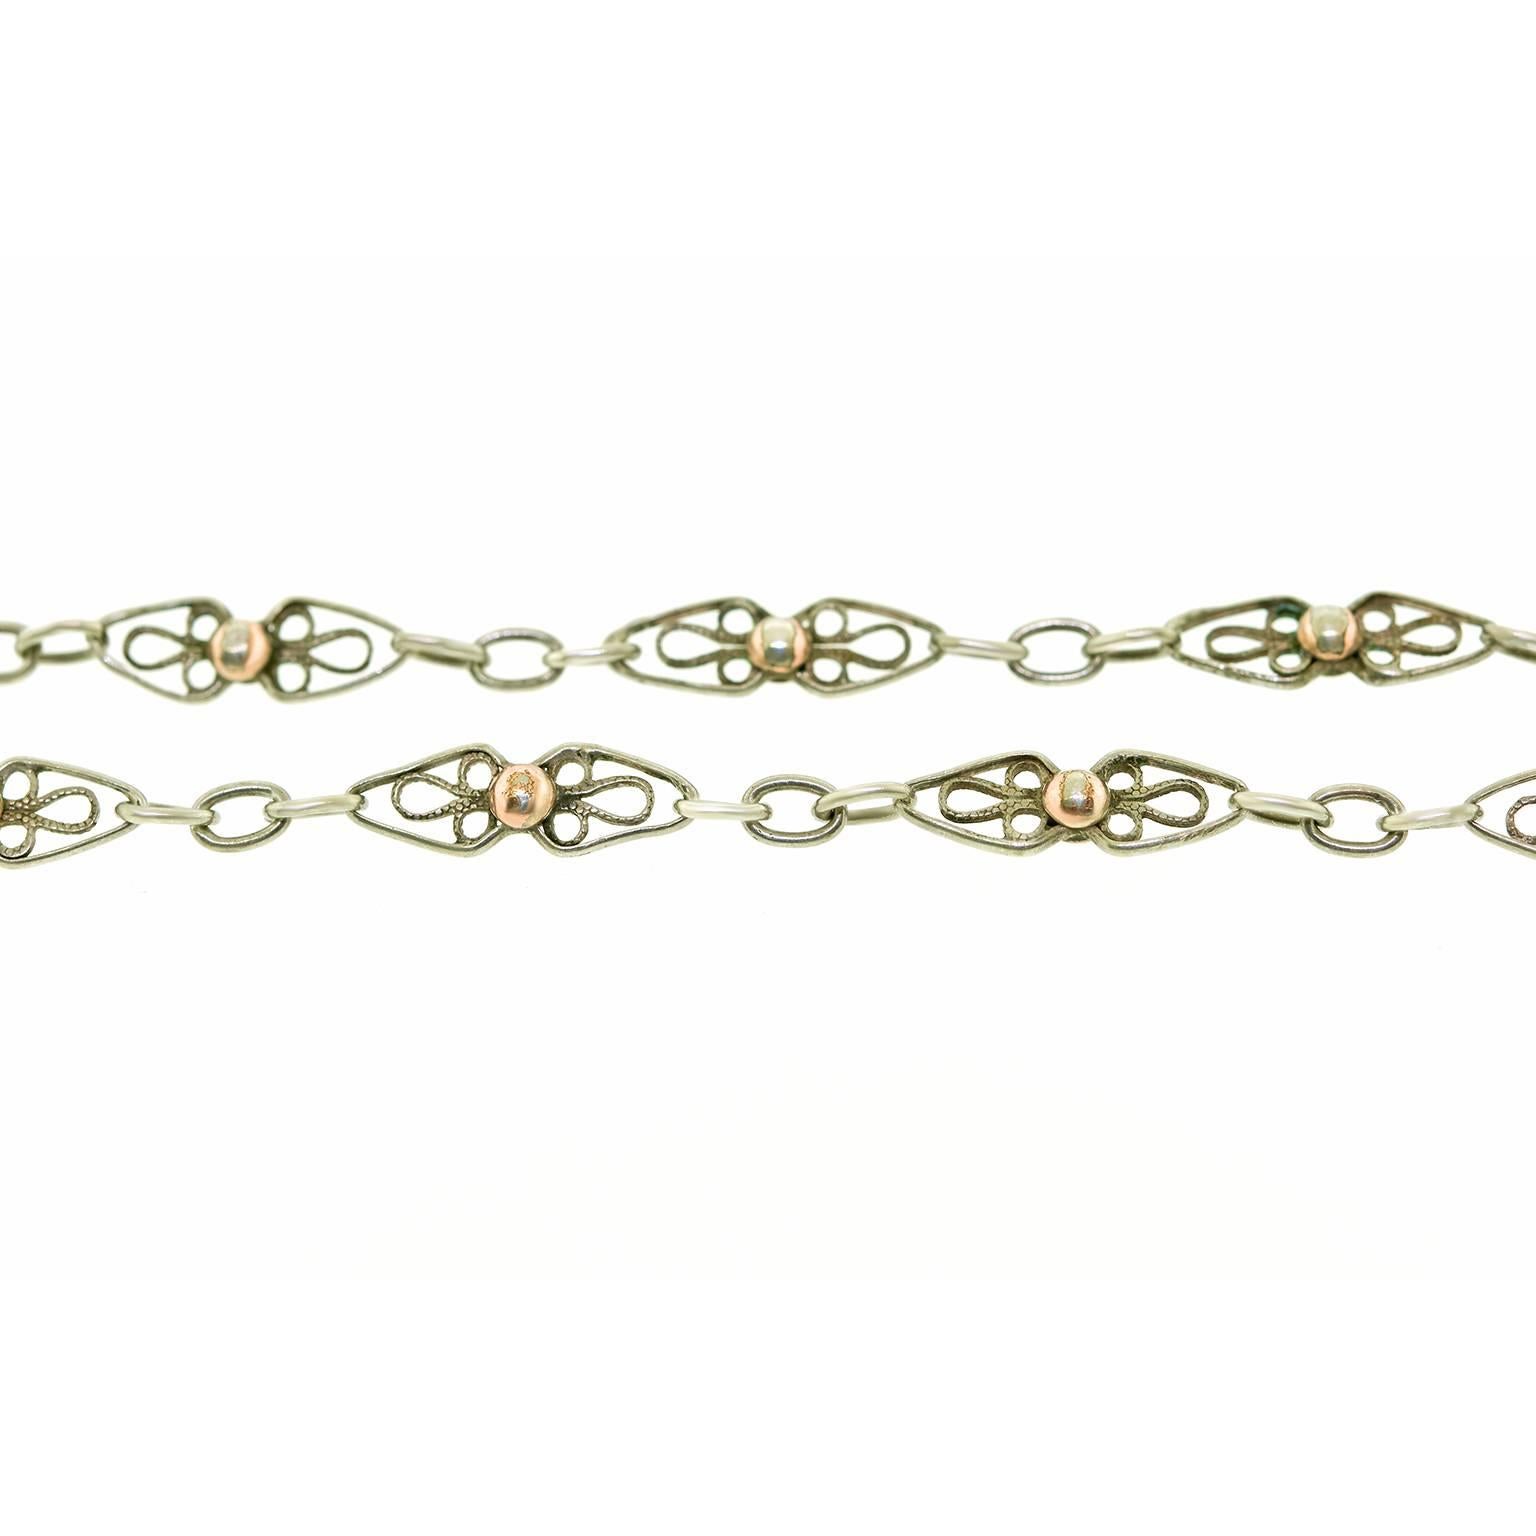 56-inch-long Antique French Filigree Sterling Chain 4